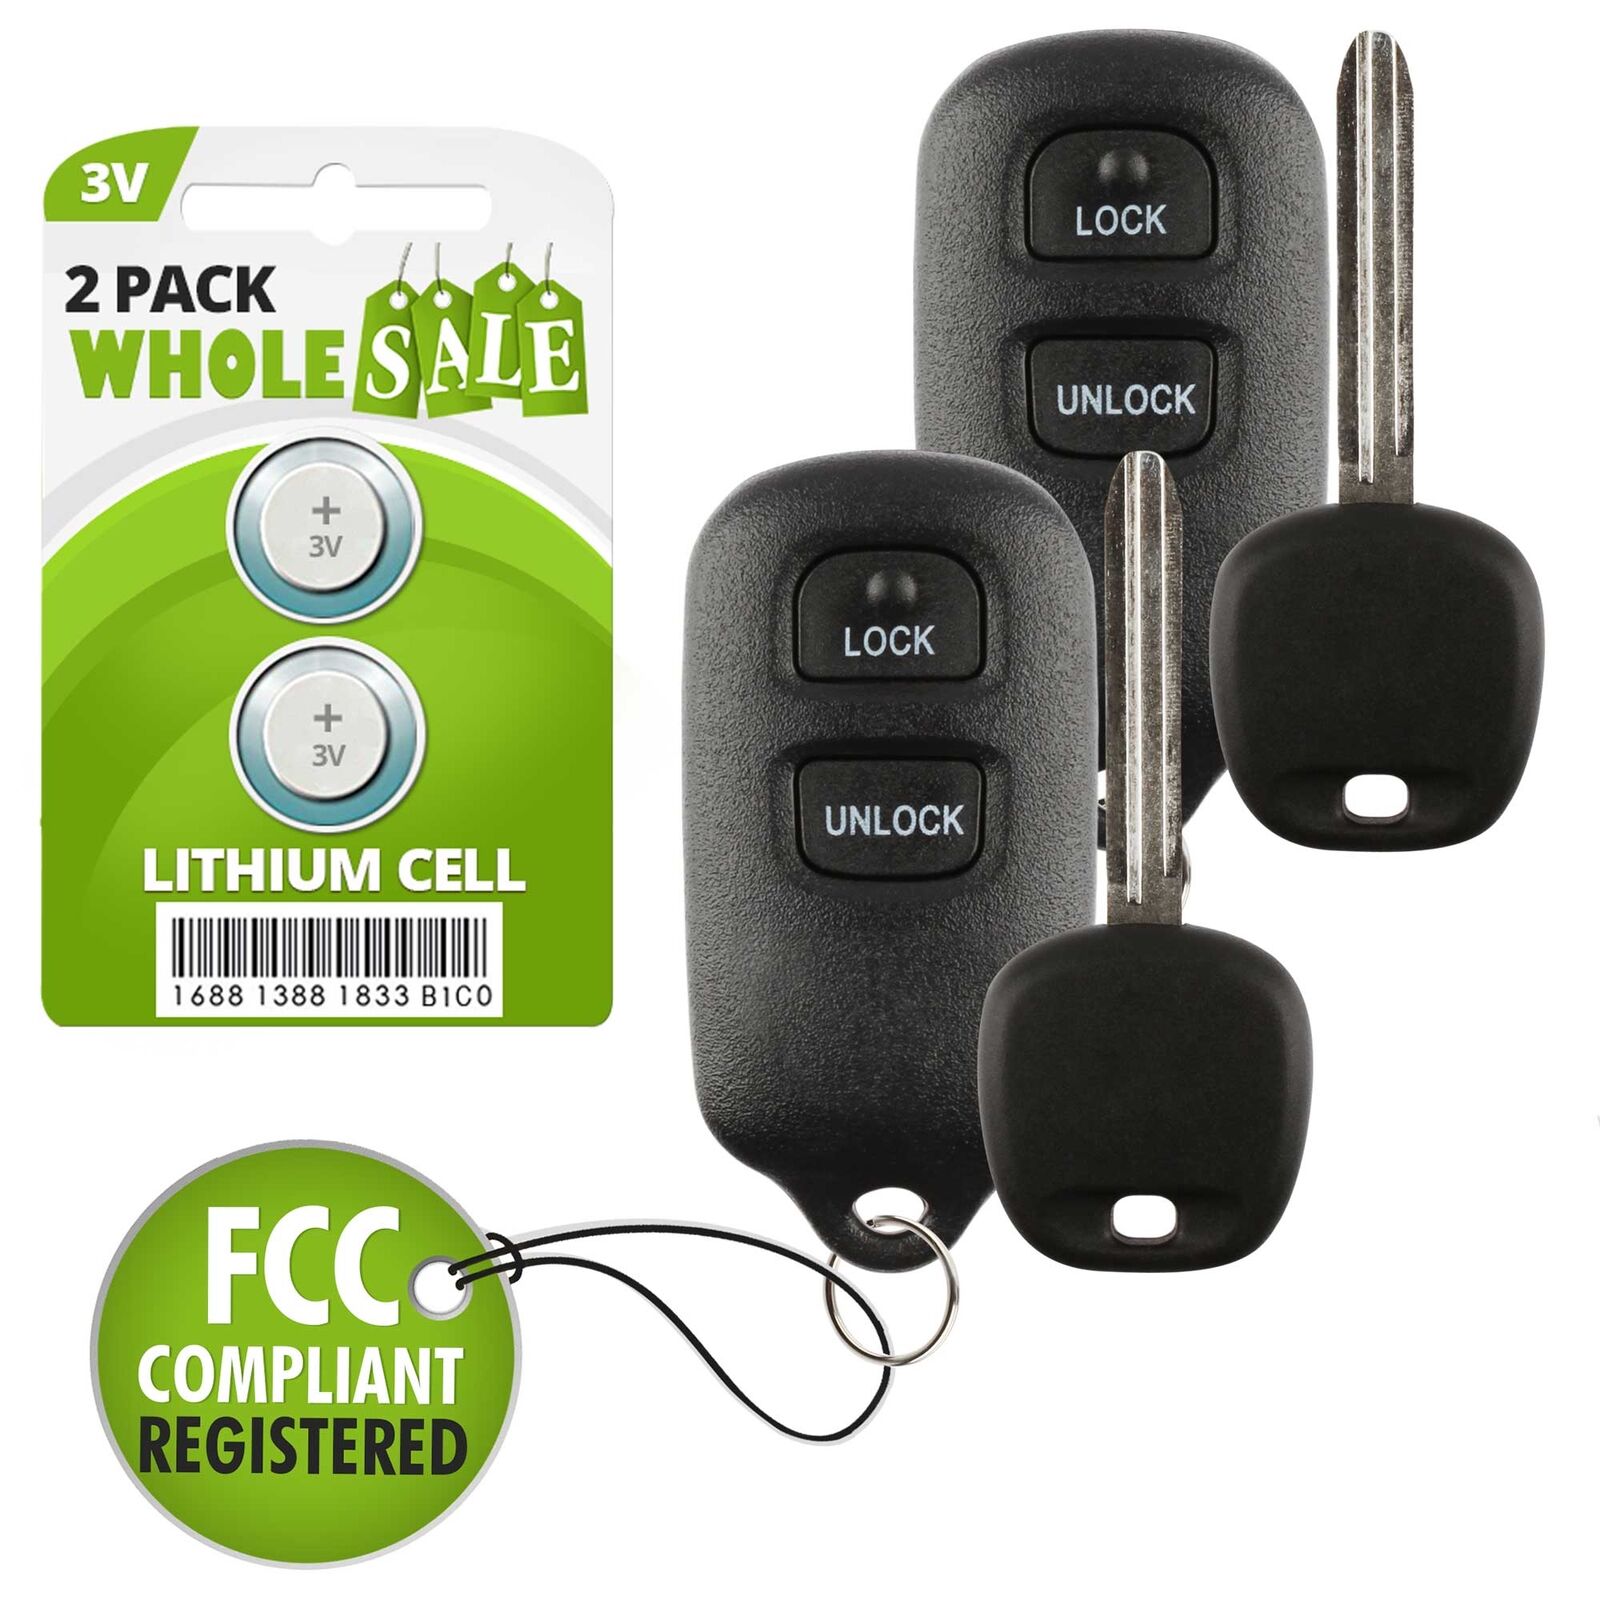 2 Replacement For 2003 2004 2005 2006 2007 2008 Toyota Corolla Matrix Key + Fob